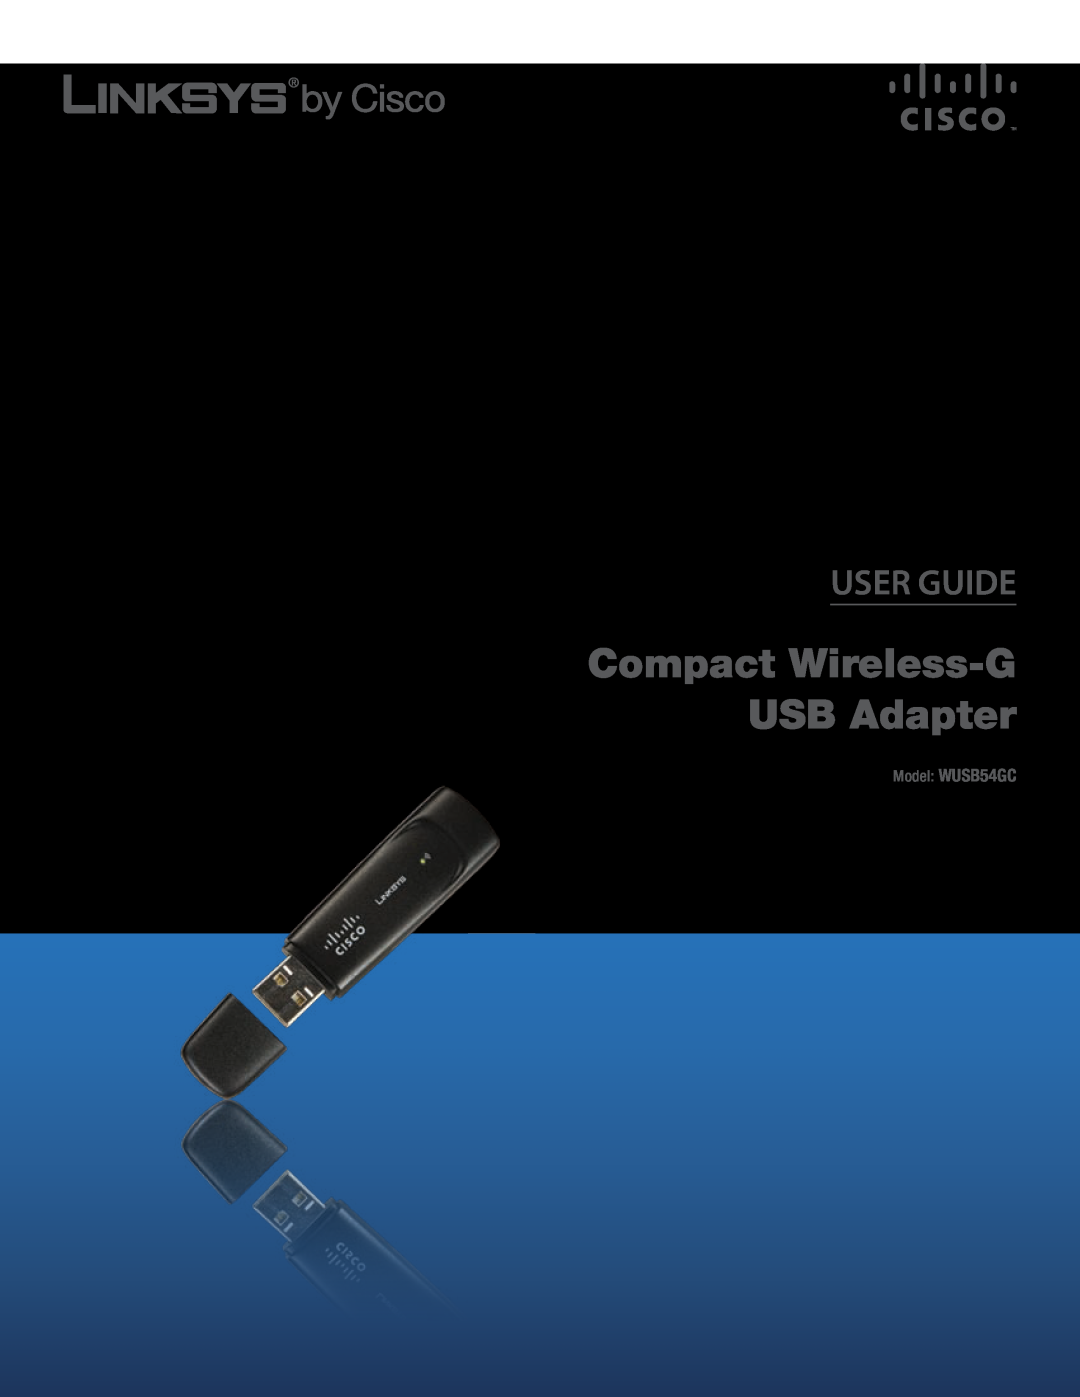 Cisco Systems manual Compact Wireless-G USB Adapter, User Guide, Model WUSB54GC 